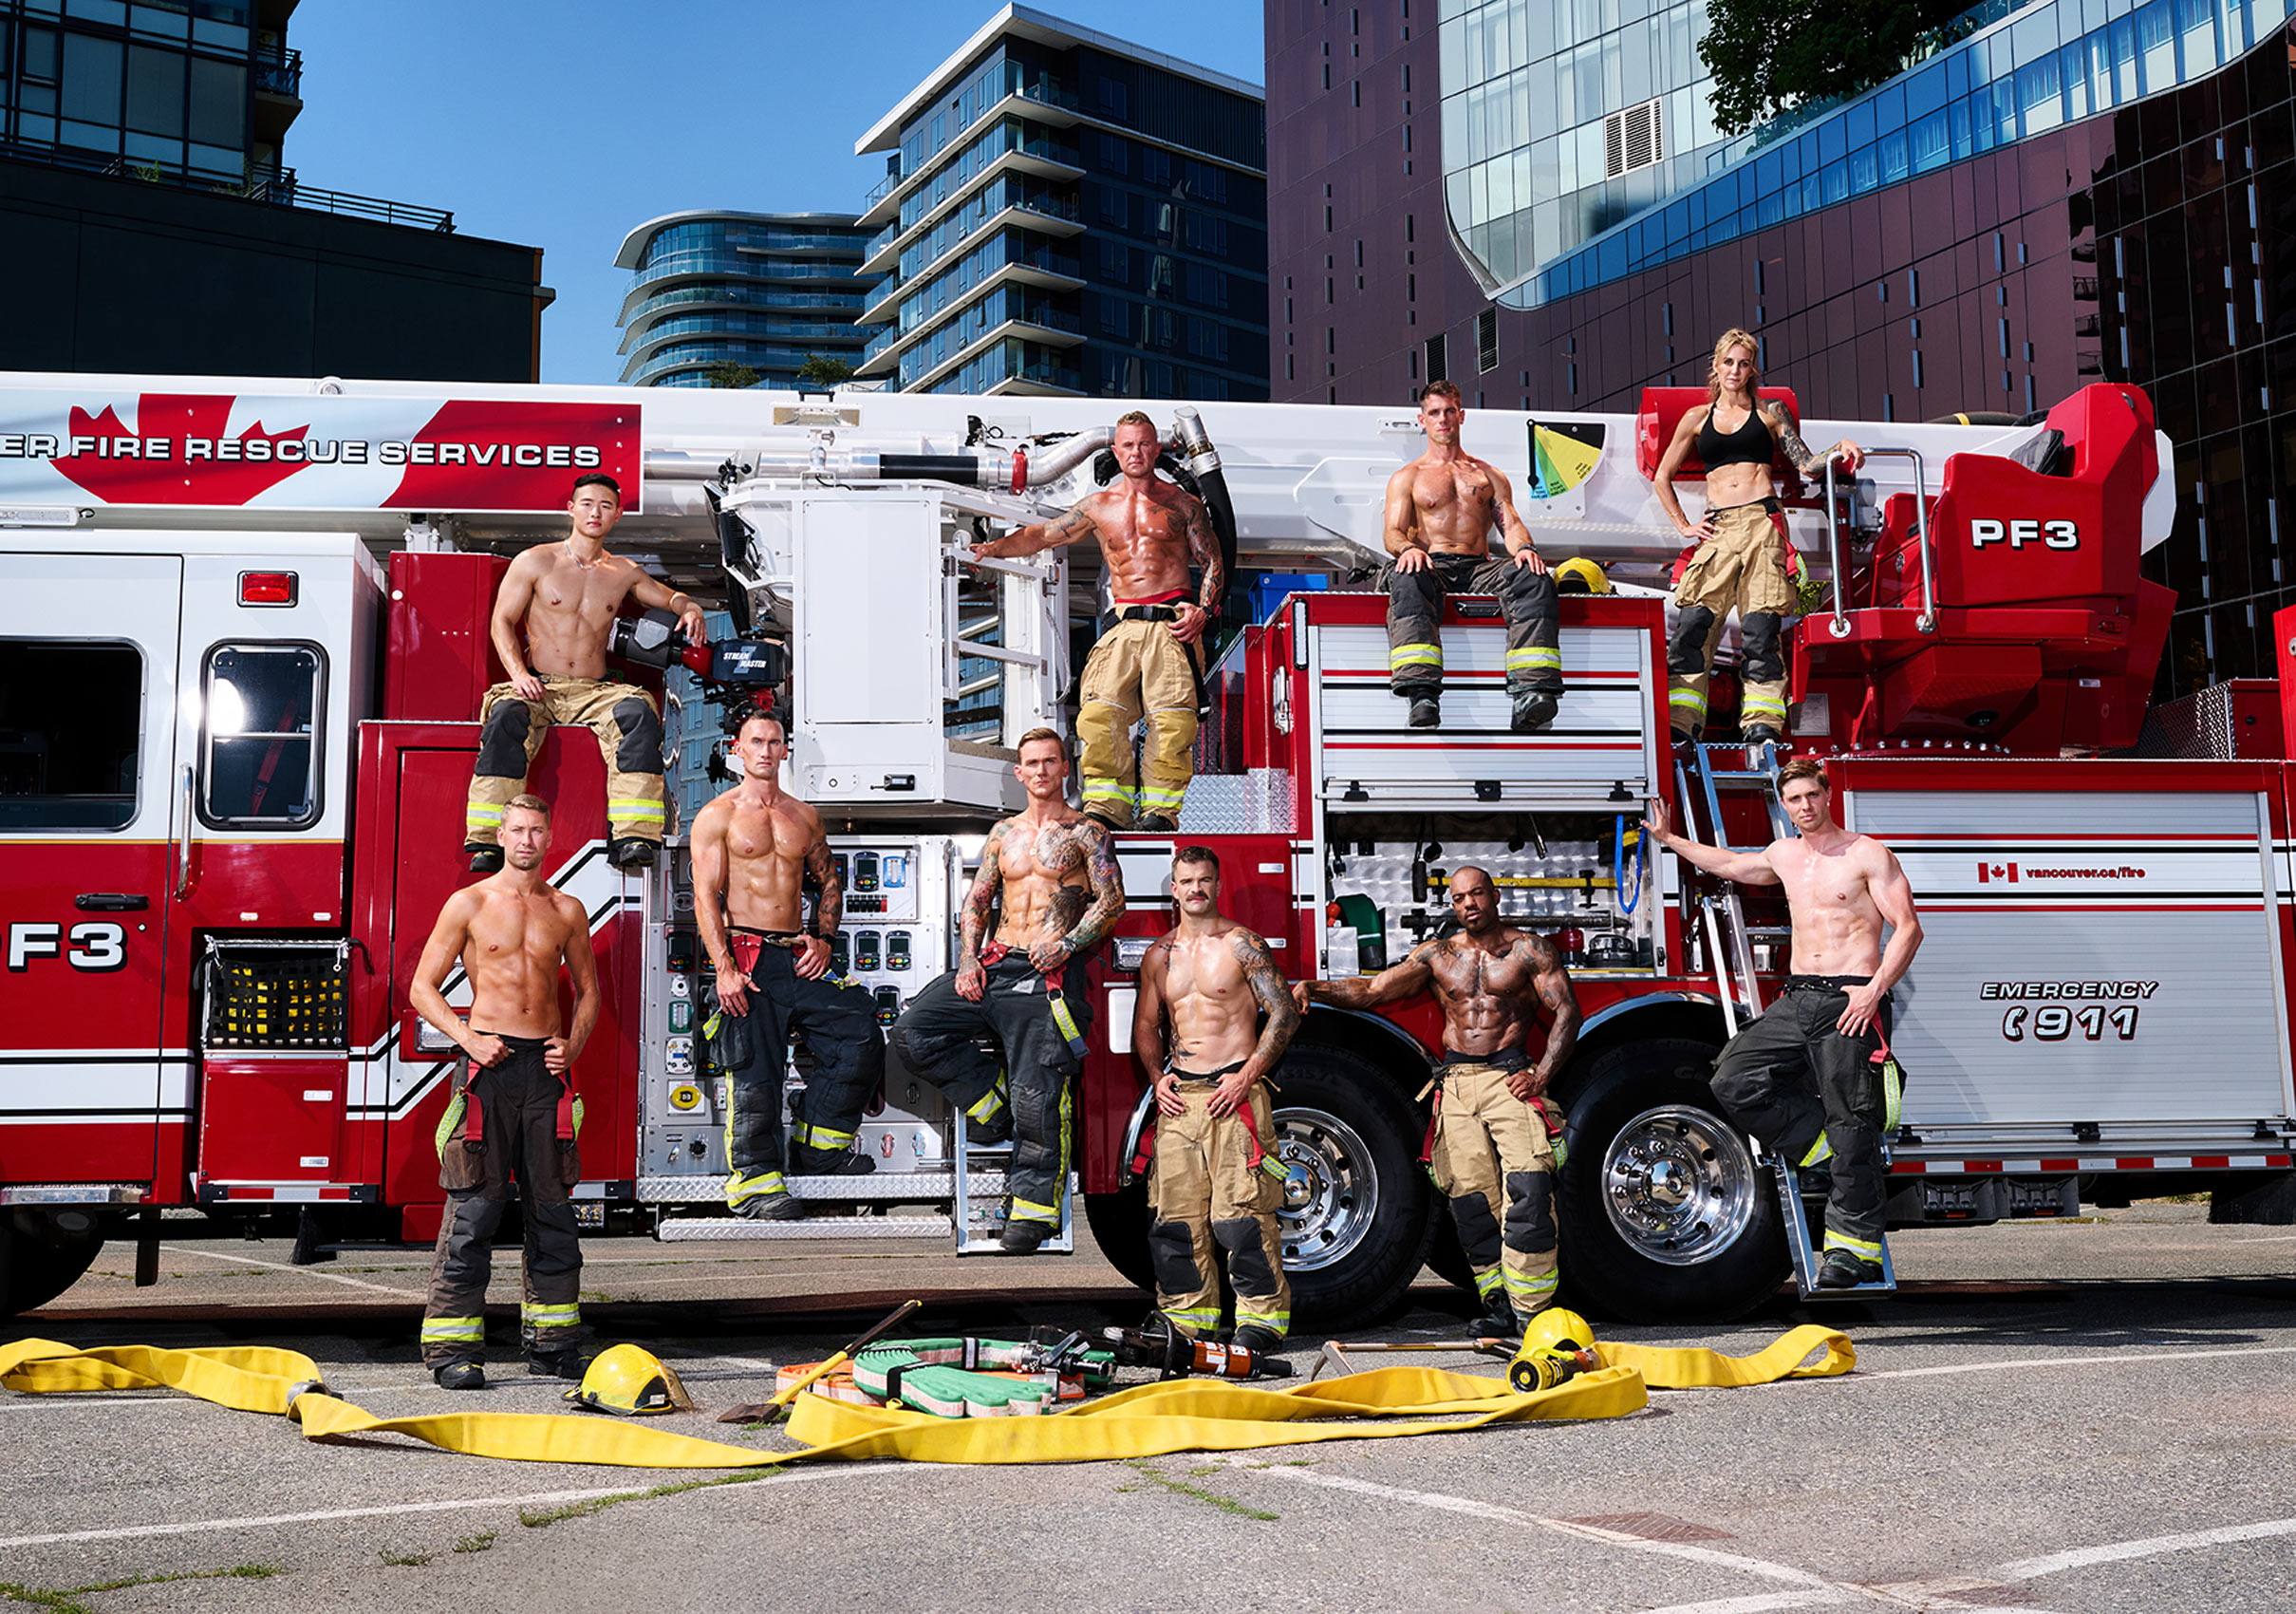 HOF-Hall-of-Flame-Calendar-Erich-Saide-Vancouver-Portrait-Photographer-Firefighters-First-Responders-Hot-Hero-Poster